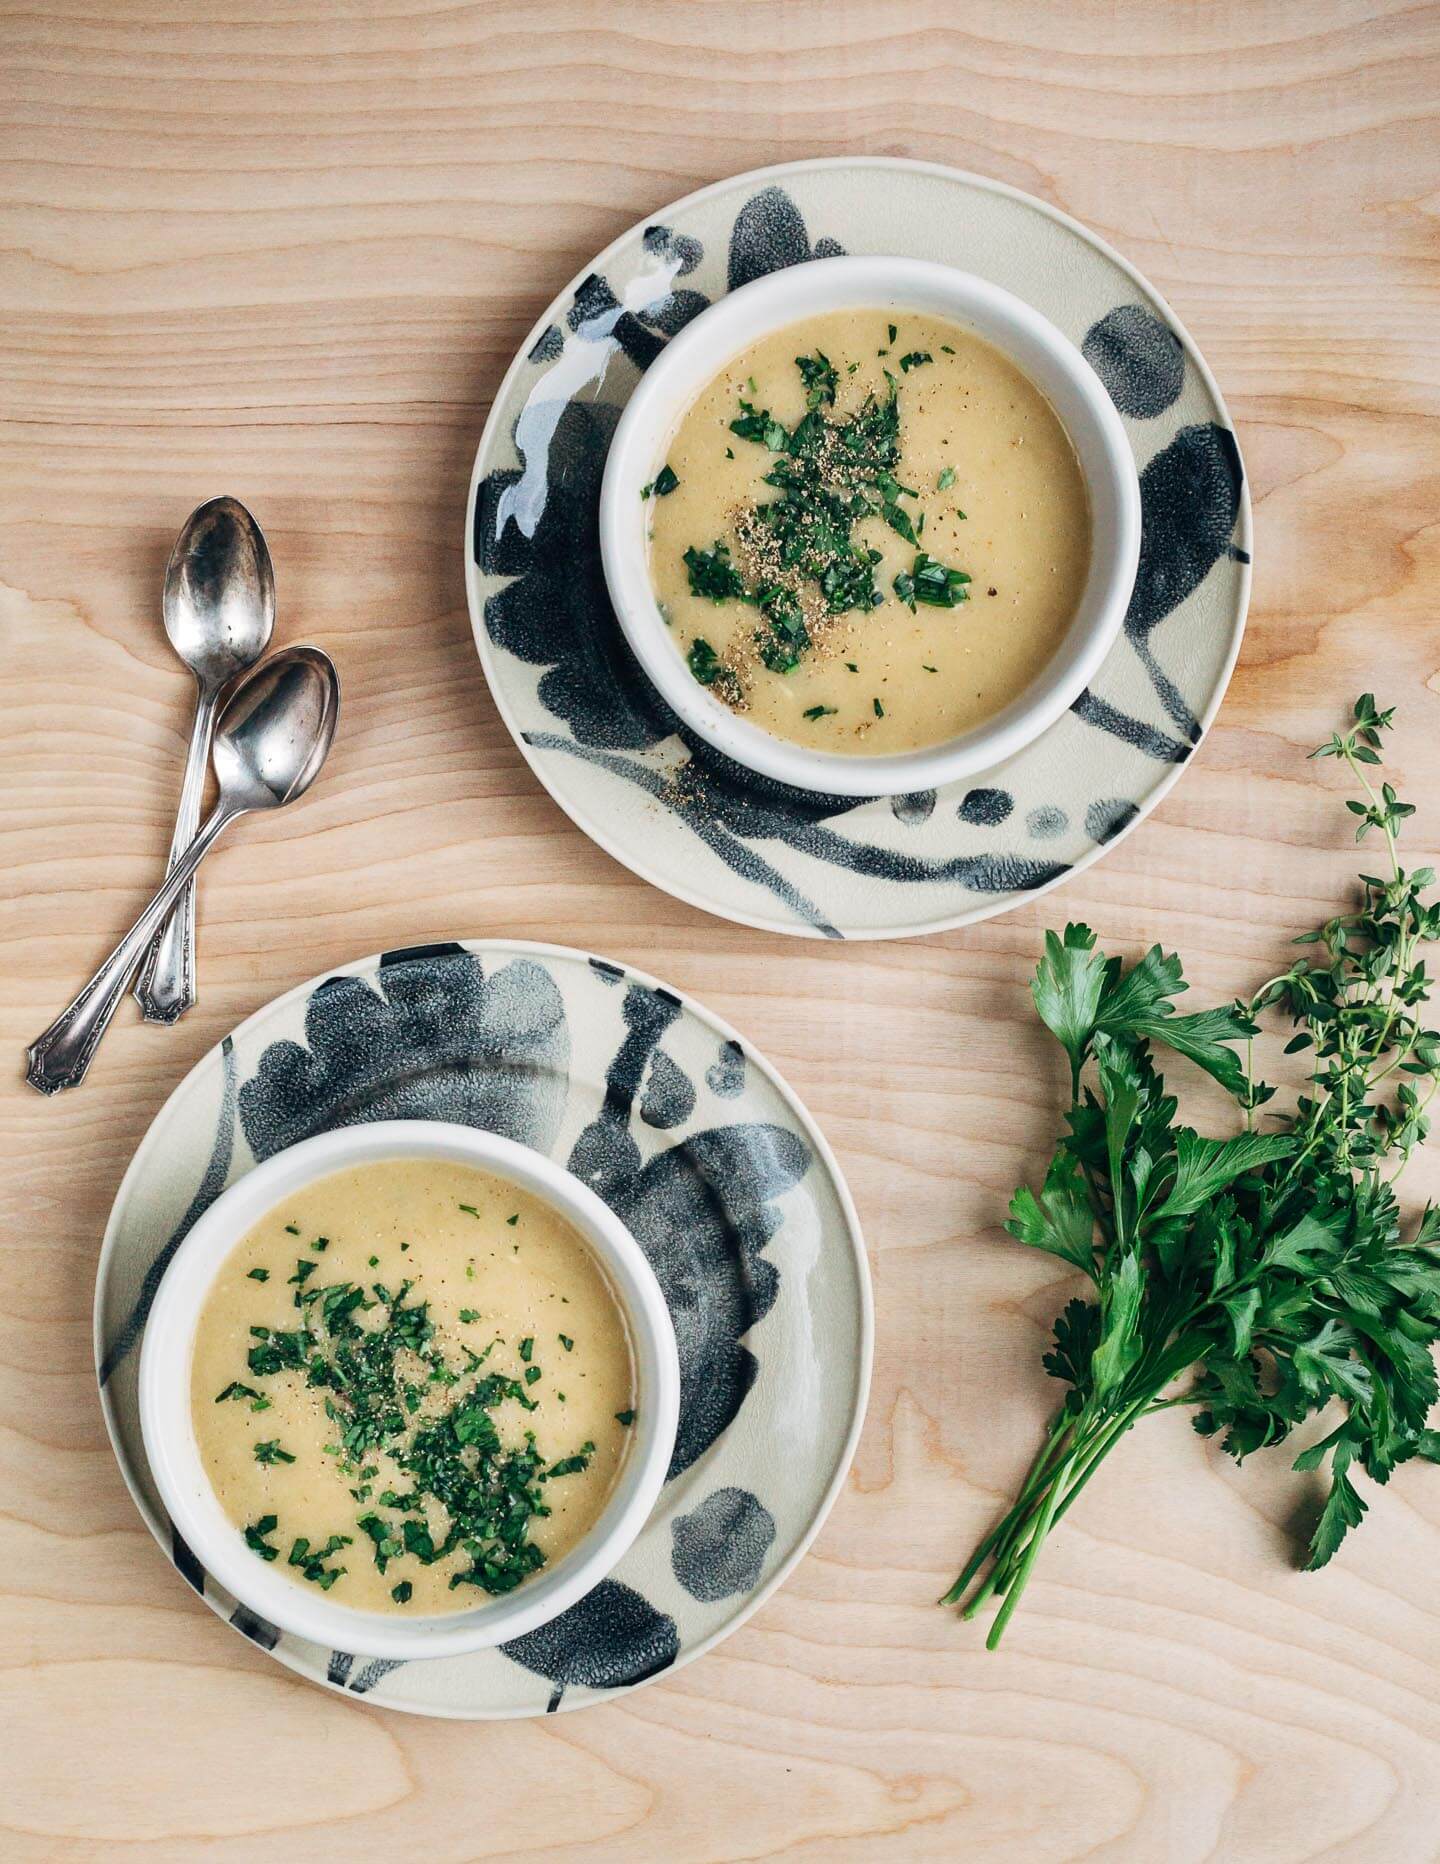 A homemade garlic soup recipe with garlic cooked two ways – roasted in olive oil and slow-sauteed with shallots. 